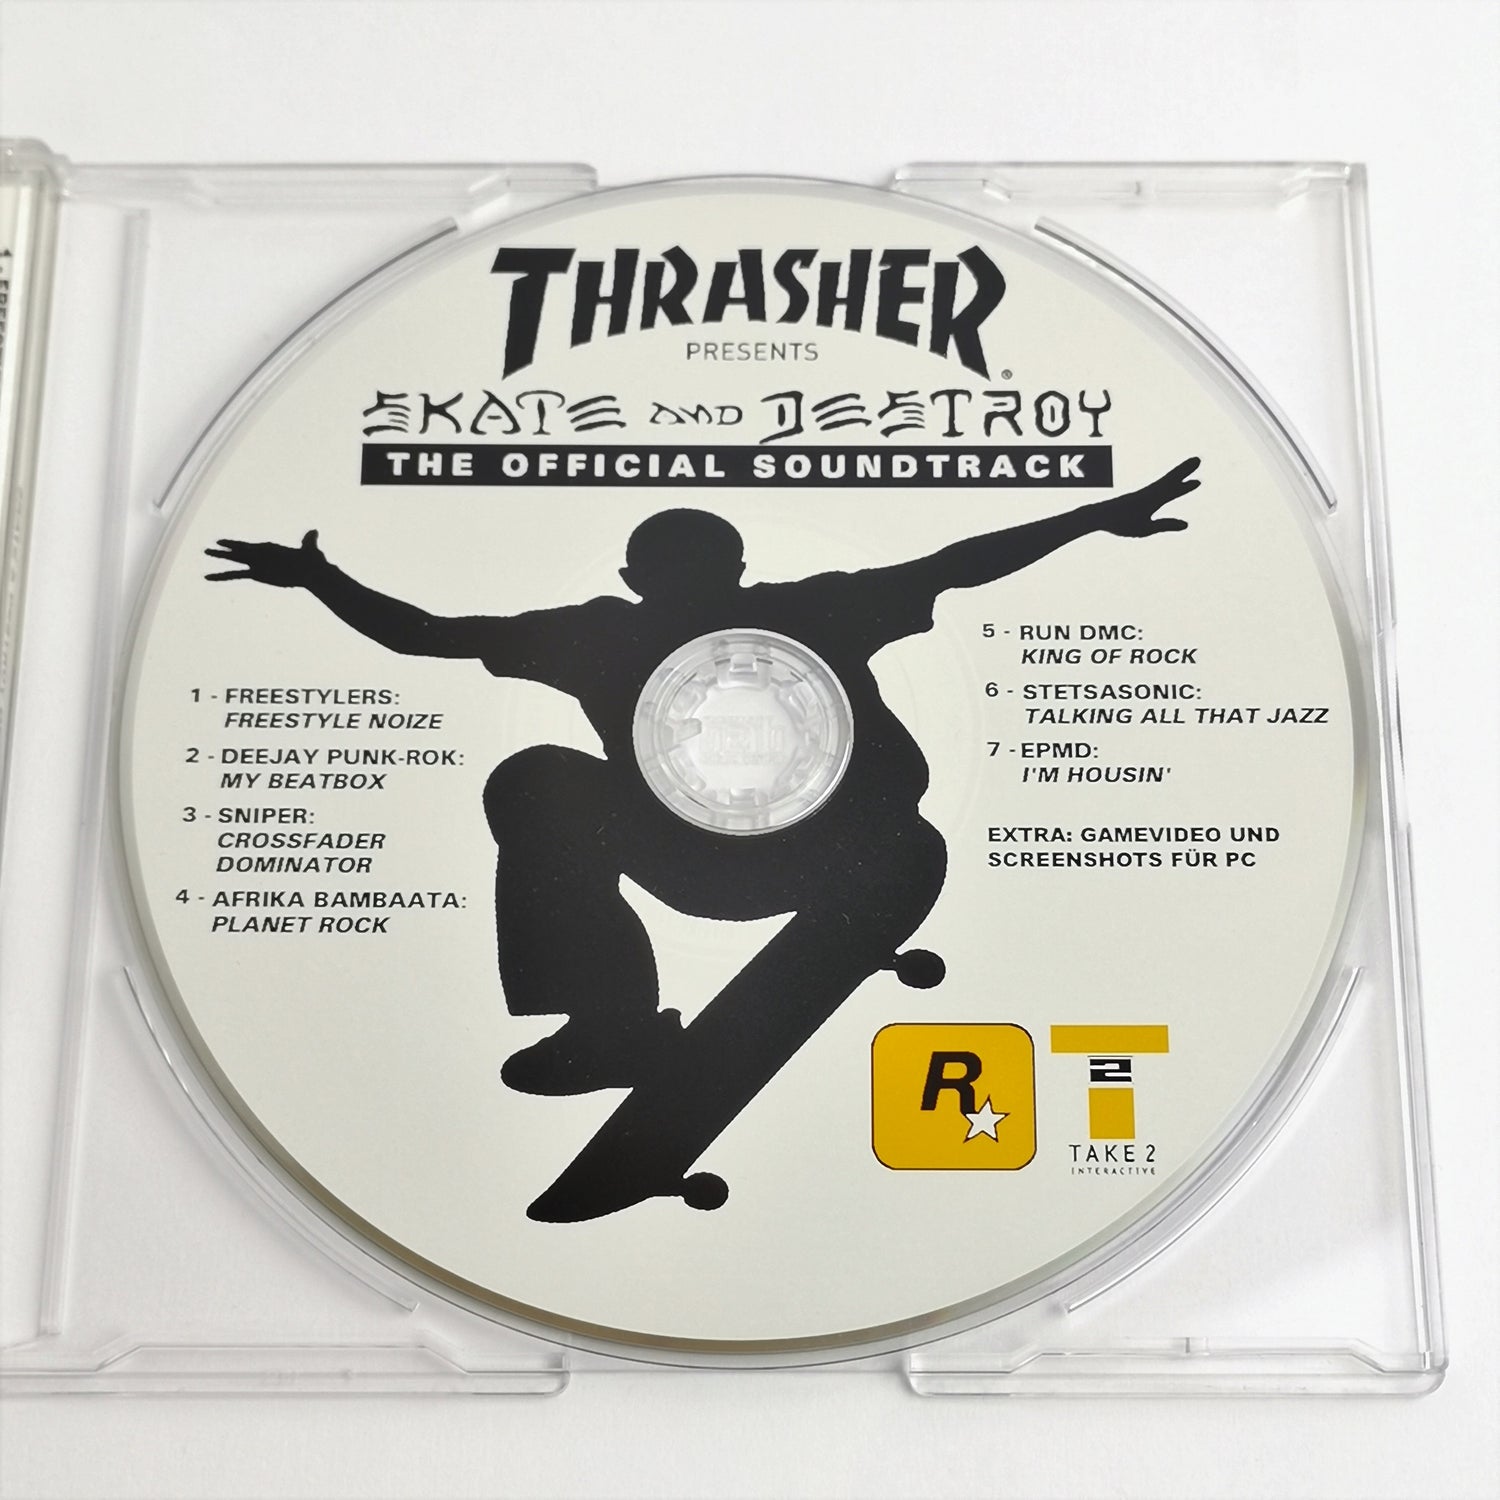 Audio soundtrack CD for the game: Trasher Skate and Destroy - PS1